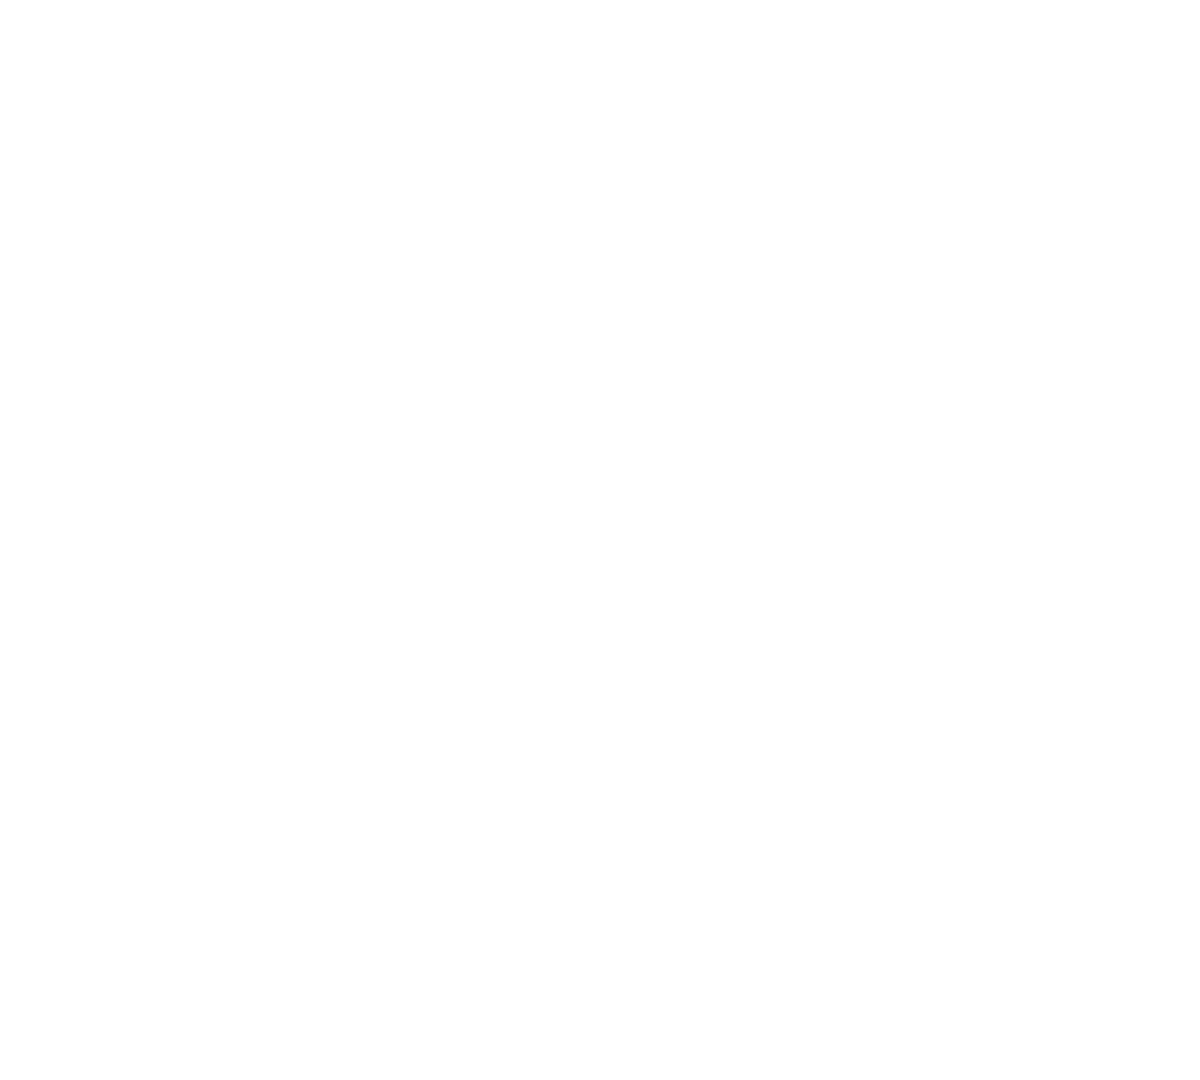 Icon that links to Itch.io site.